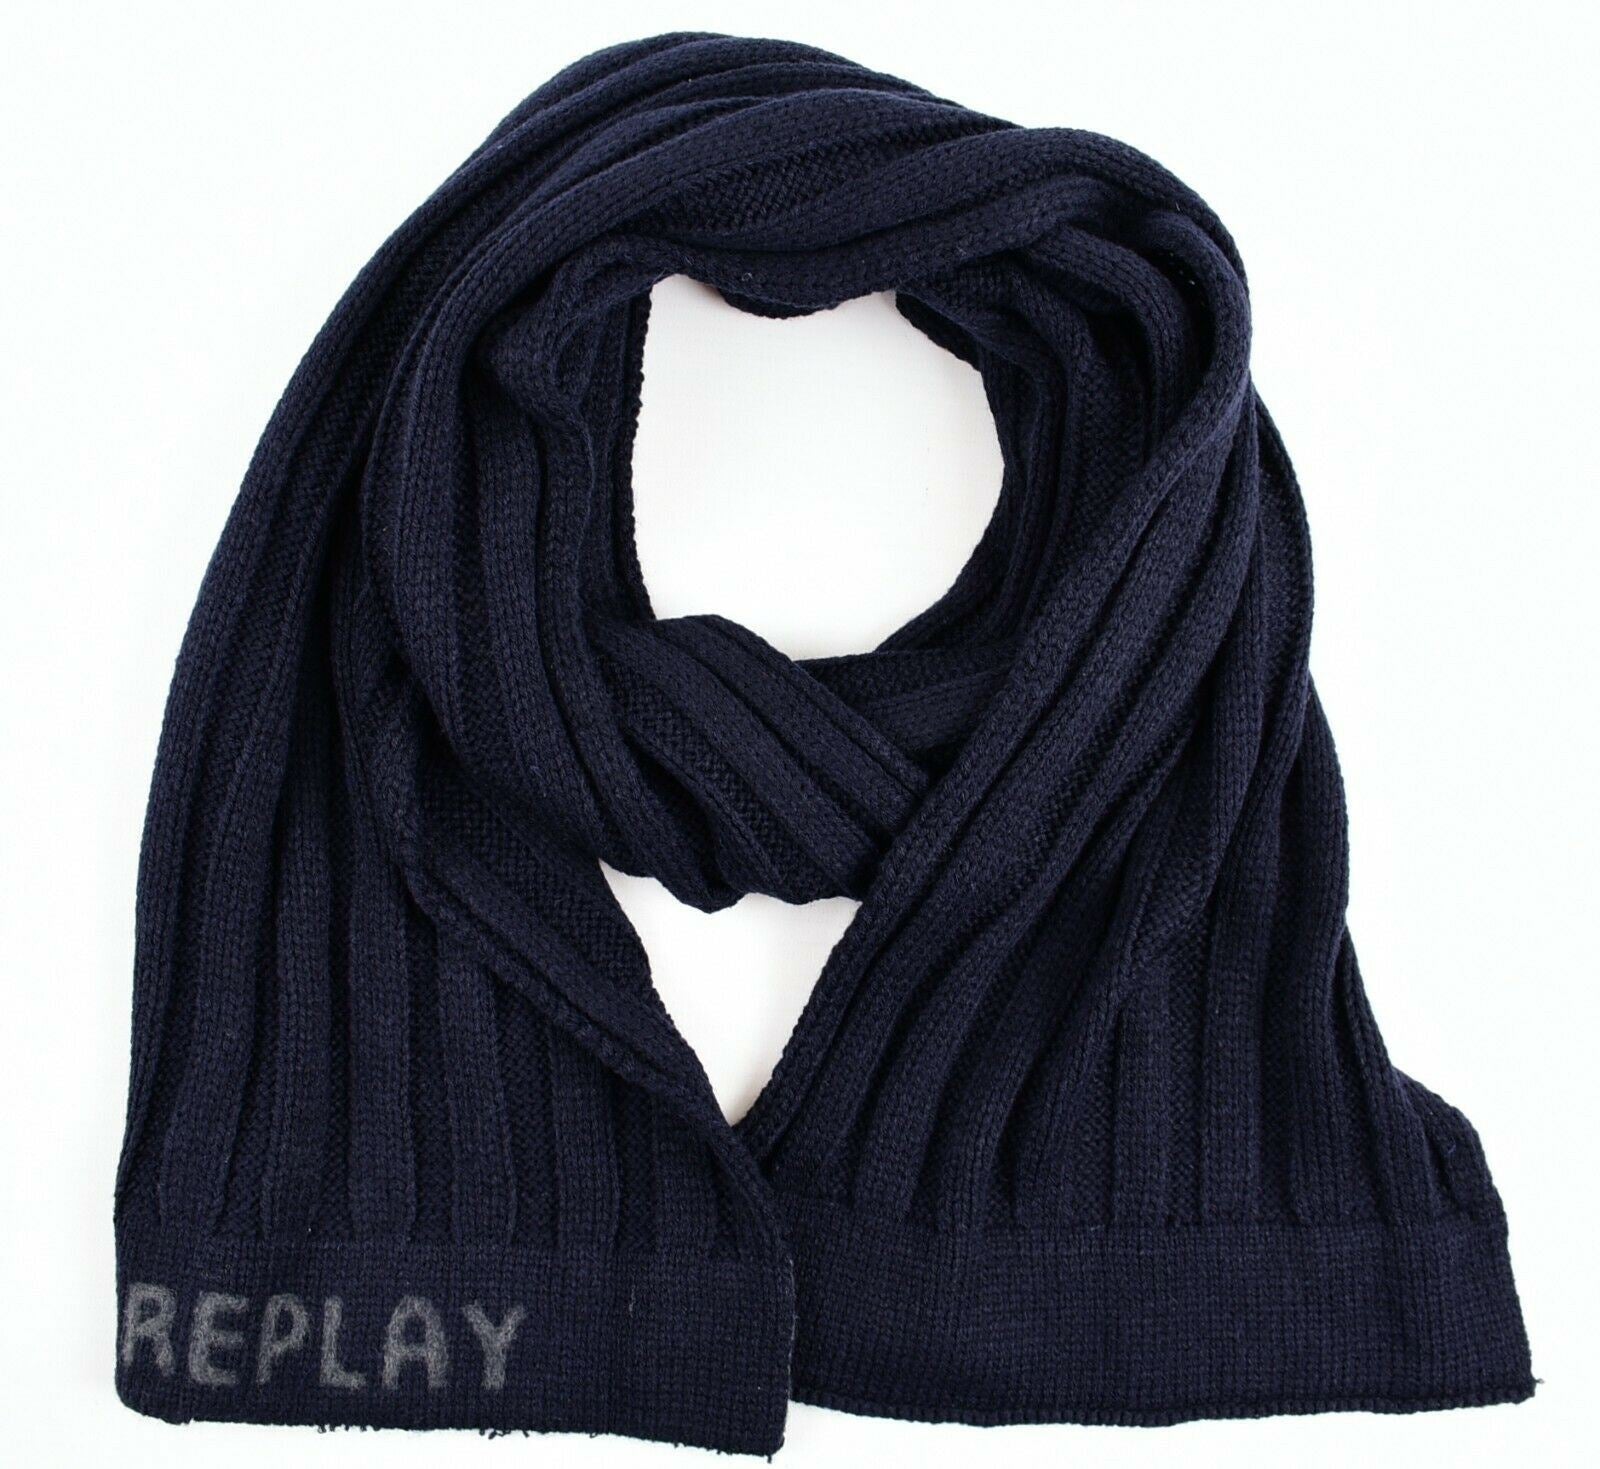 REPLAY Men's Navy Blue Rib Knit Scarf, Acrylic /Wool Blend, Gift Boxed